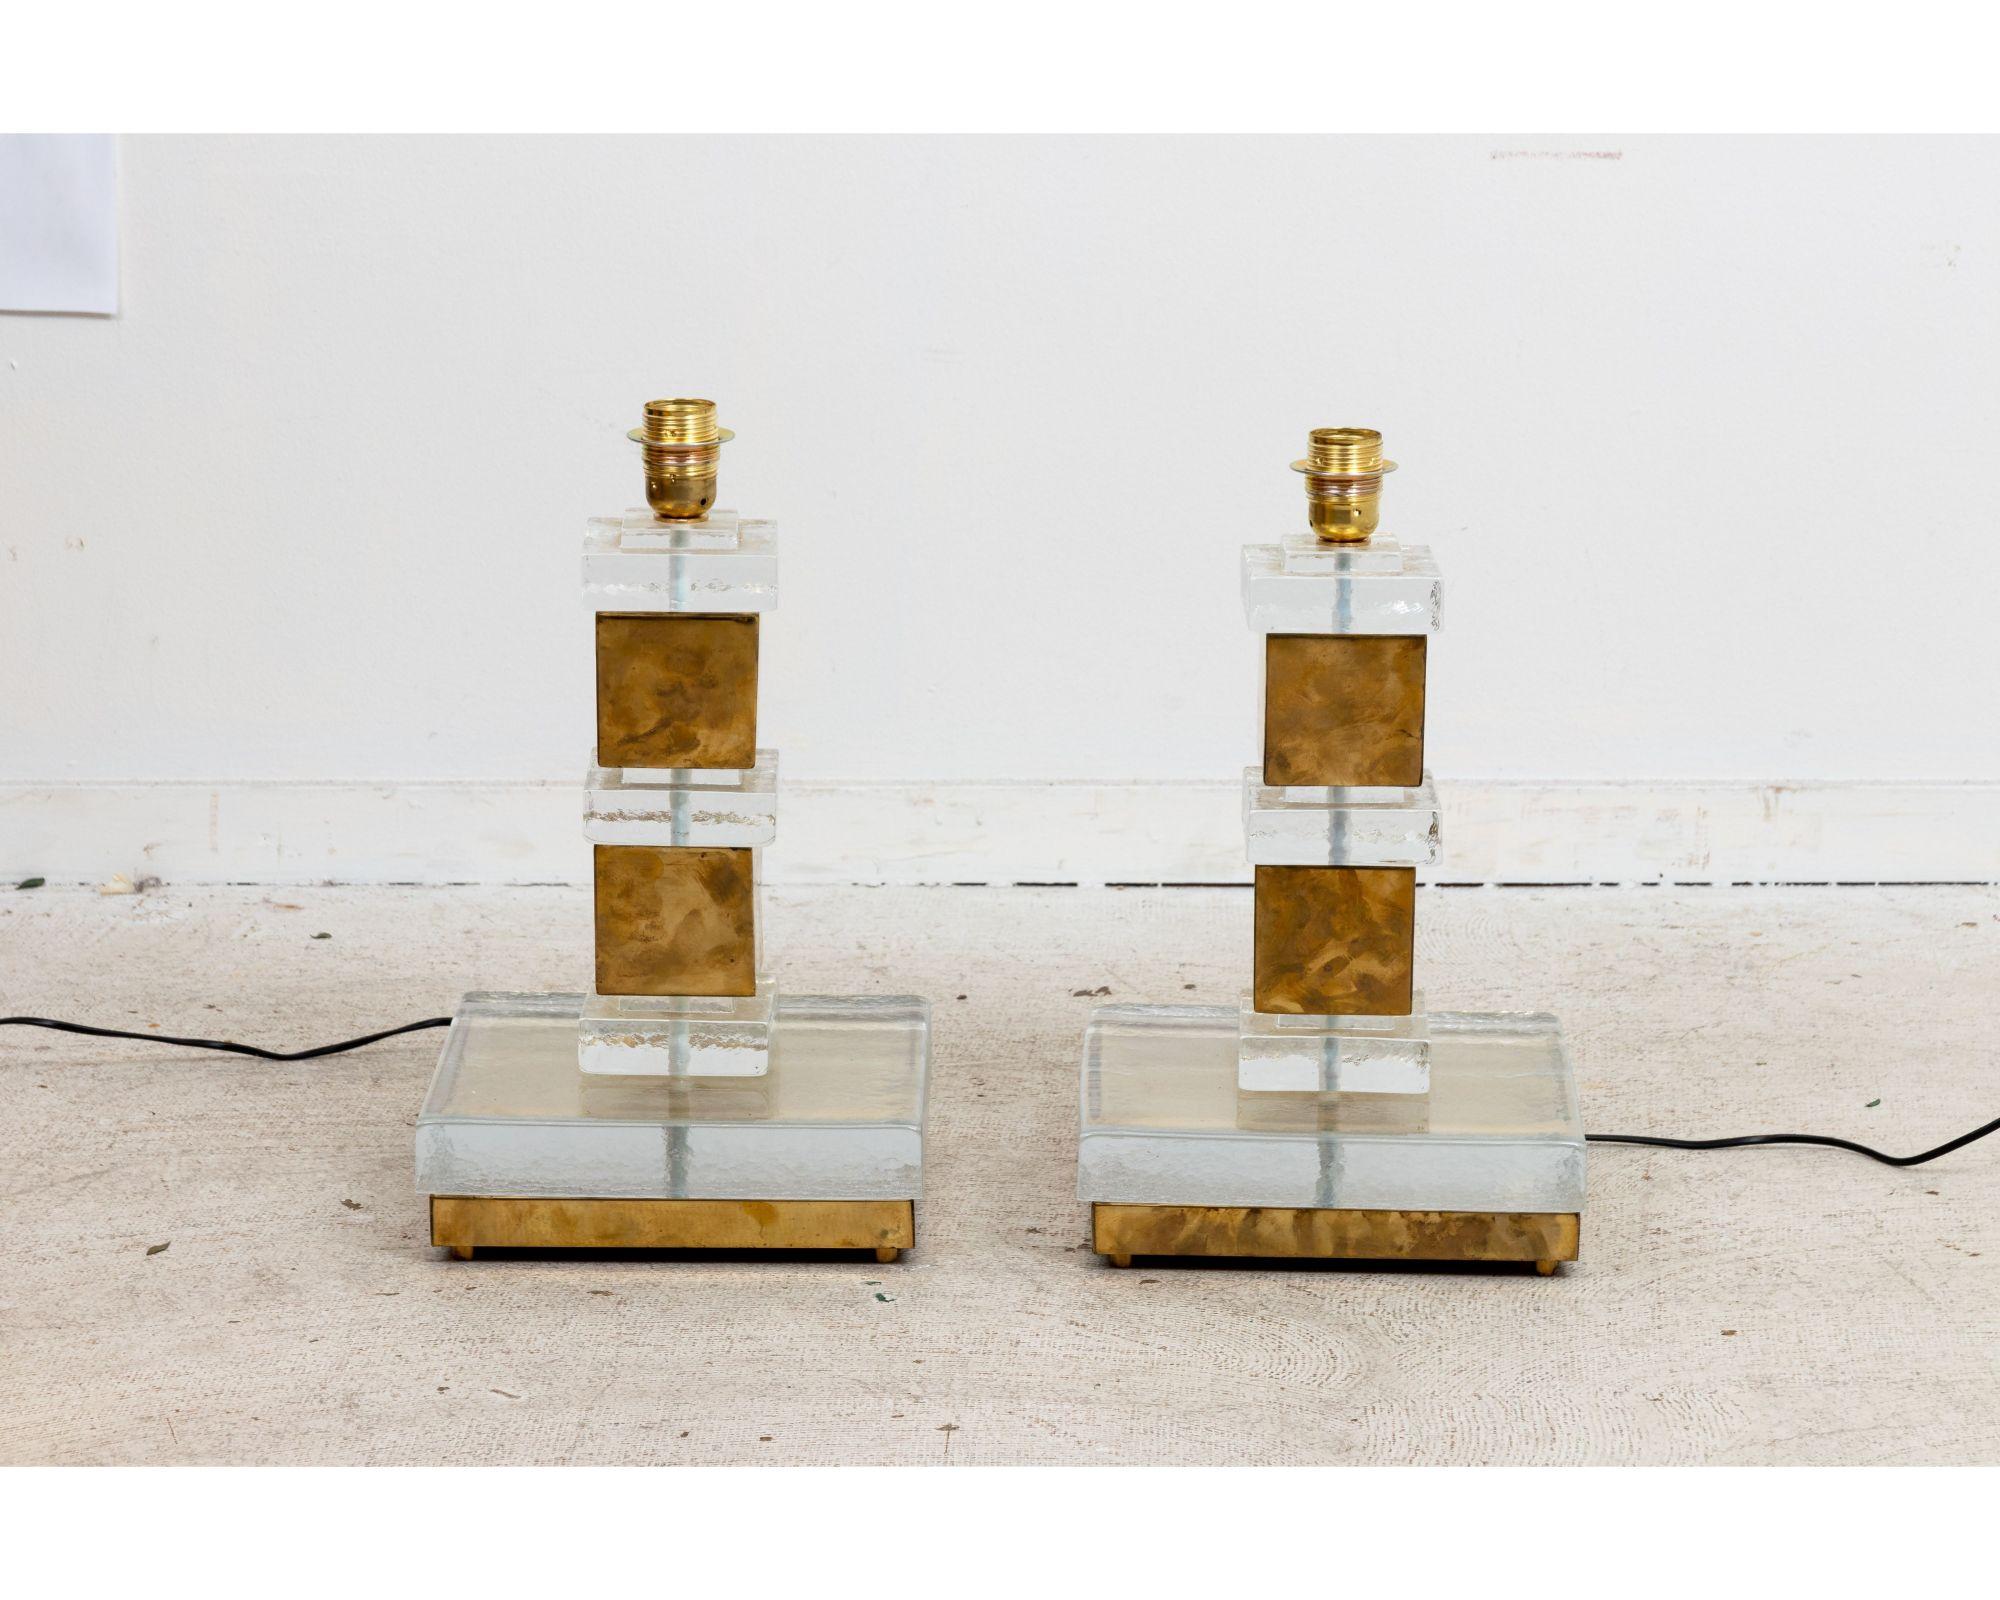 Circa early 21st century pair of Murano glass and brass table lamps with square gold shade and stacked cube base. Made in Italy. Please note of wear consistent with age.